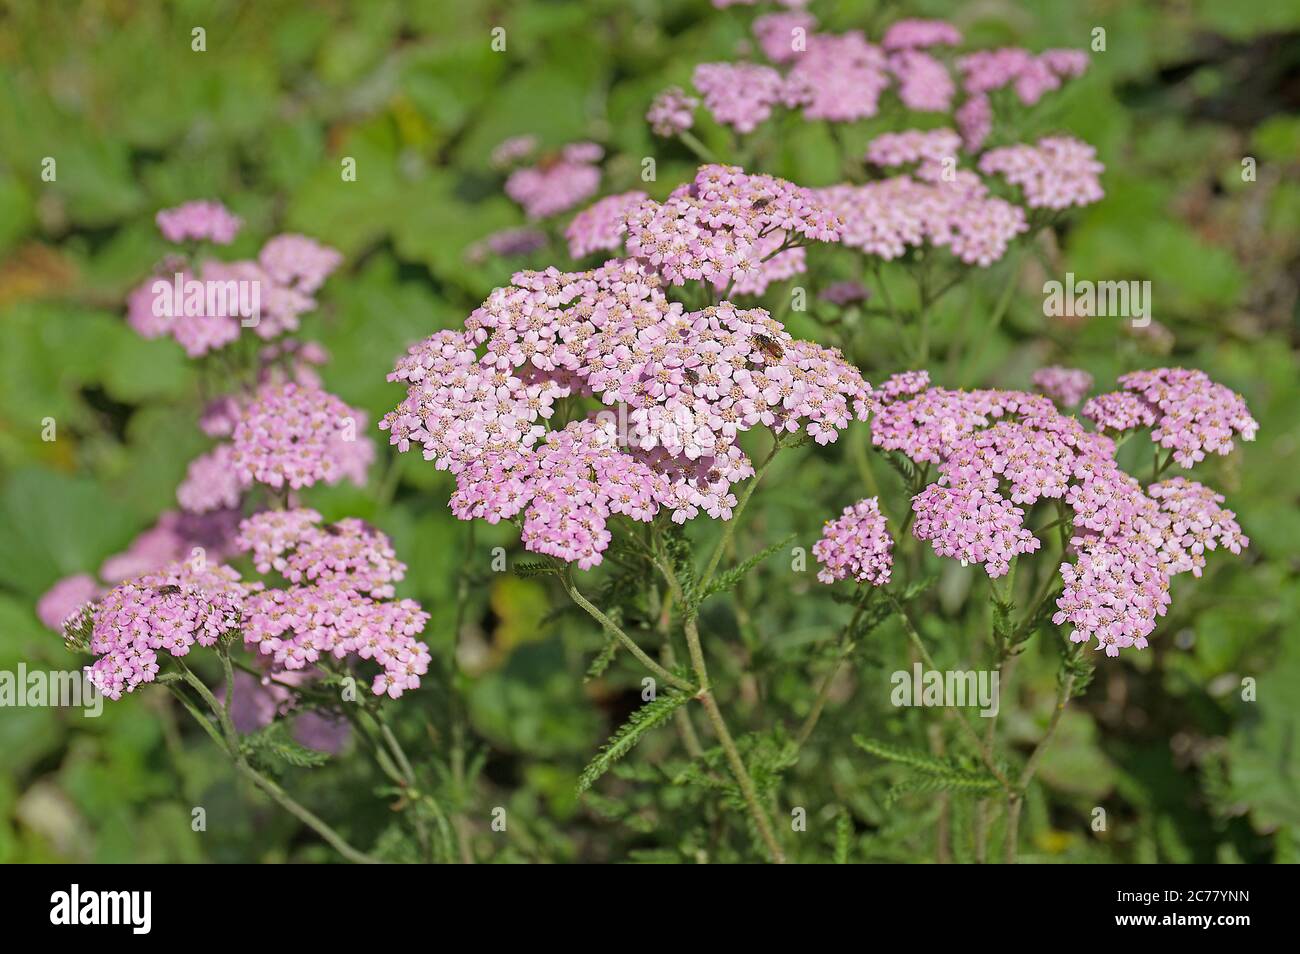 Tansy Yarrow (Achillea distans subsp.tanacetifolia) with pink or reddish flowers. Grossglockner, Alps, 2400 m, September Stock Photo